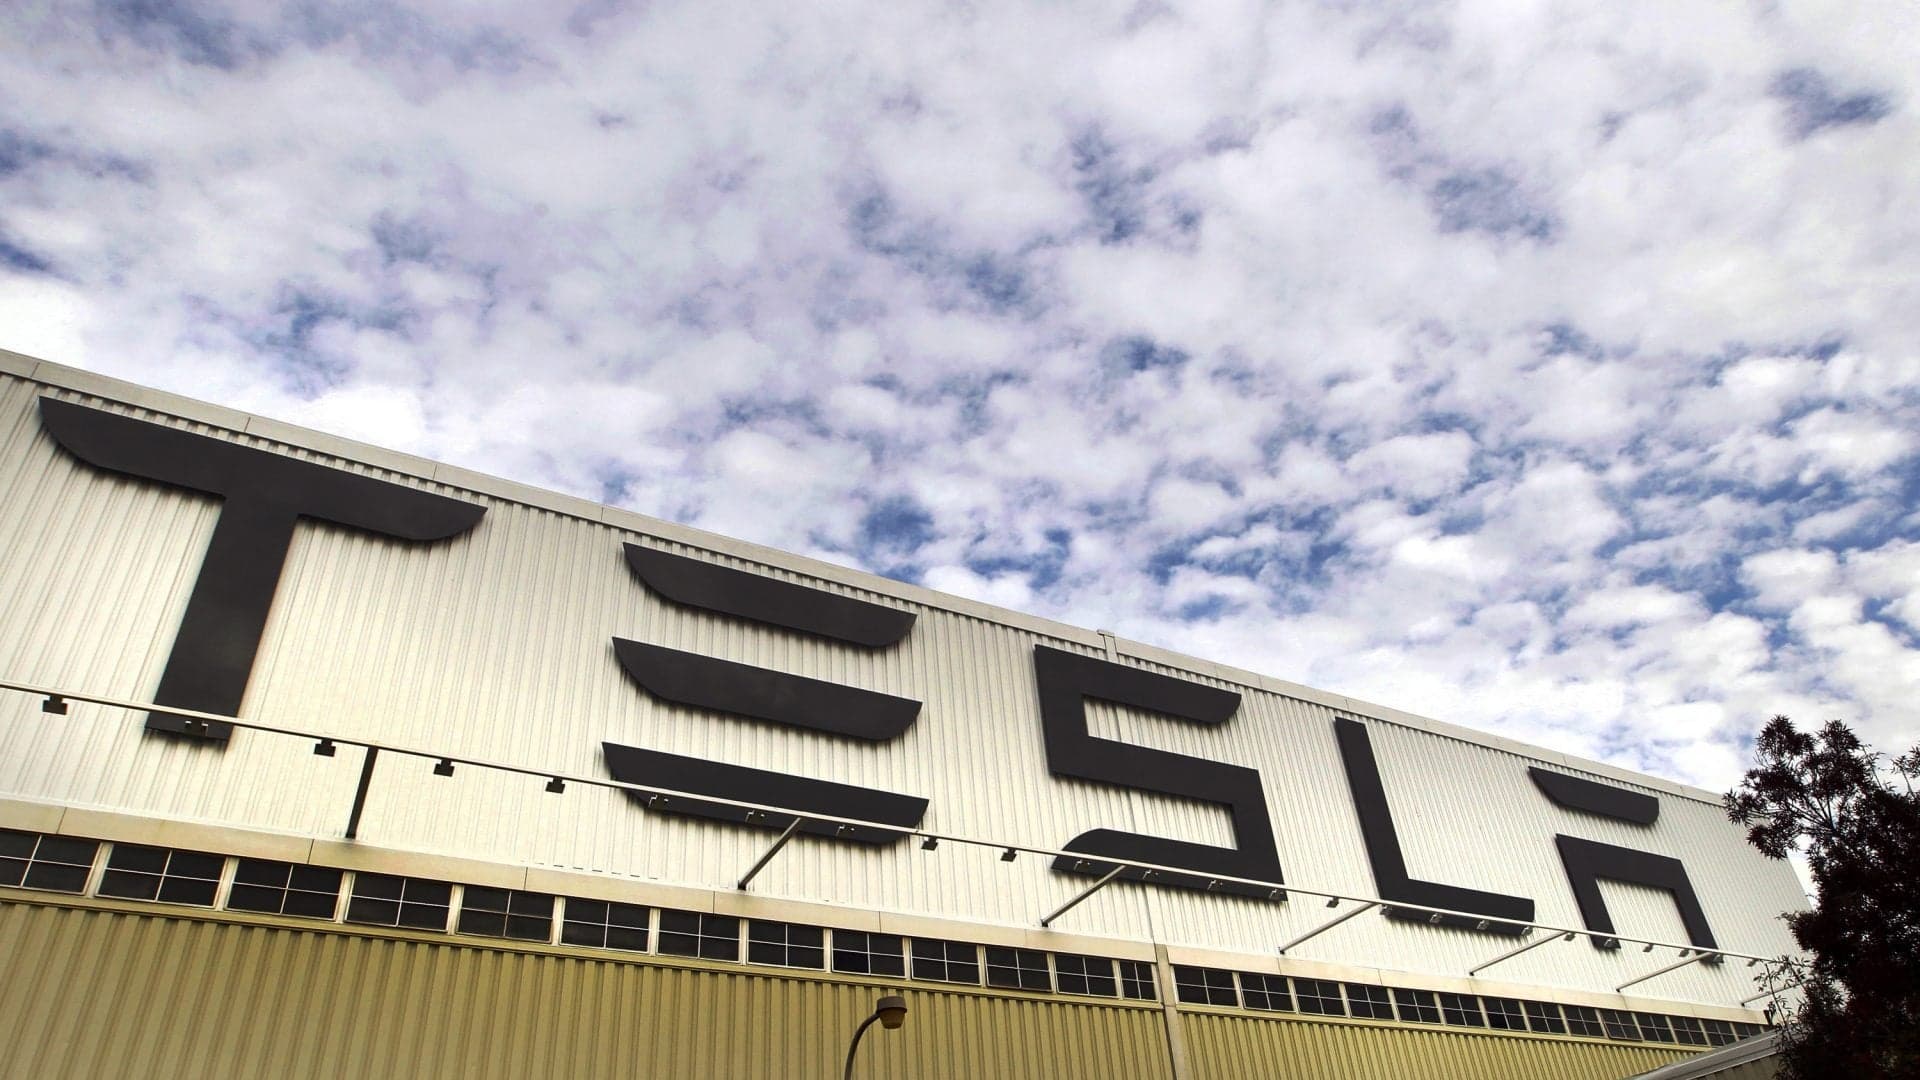 Tesla In Settlement Proceedings Over 19 Air Quality Violations As Investigation Continues